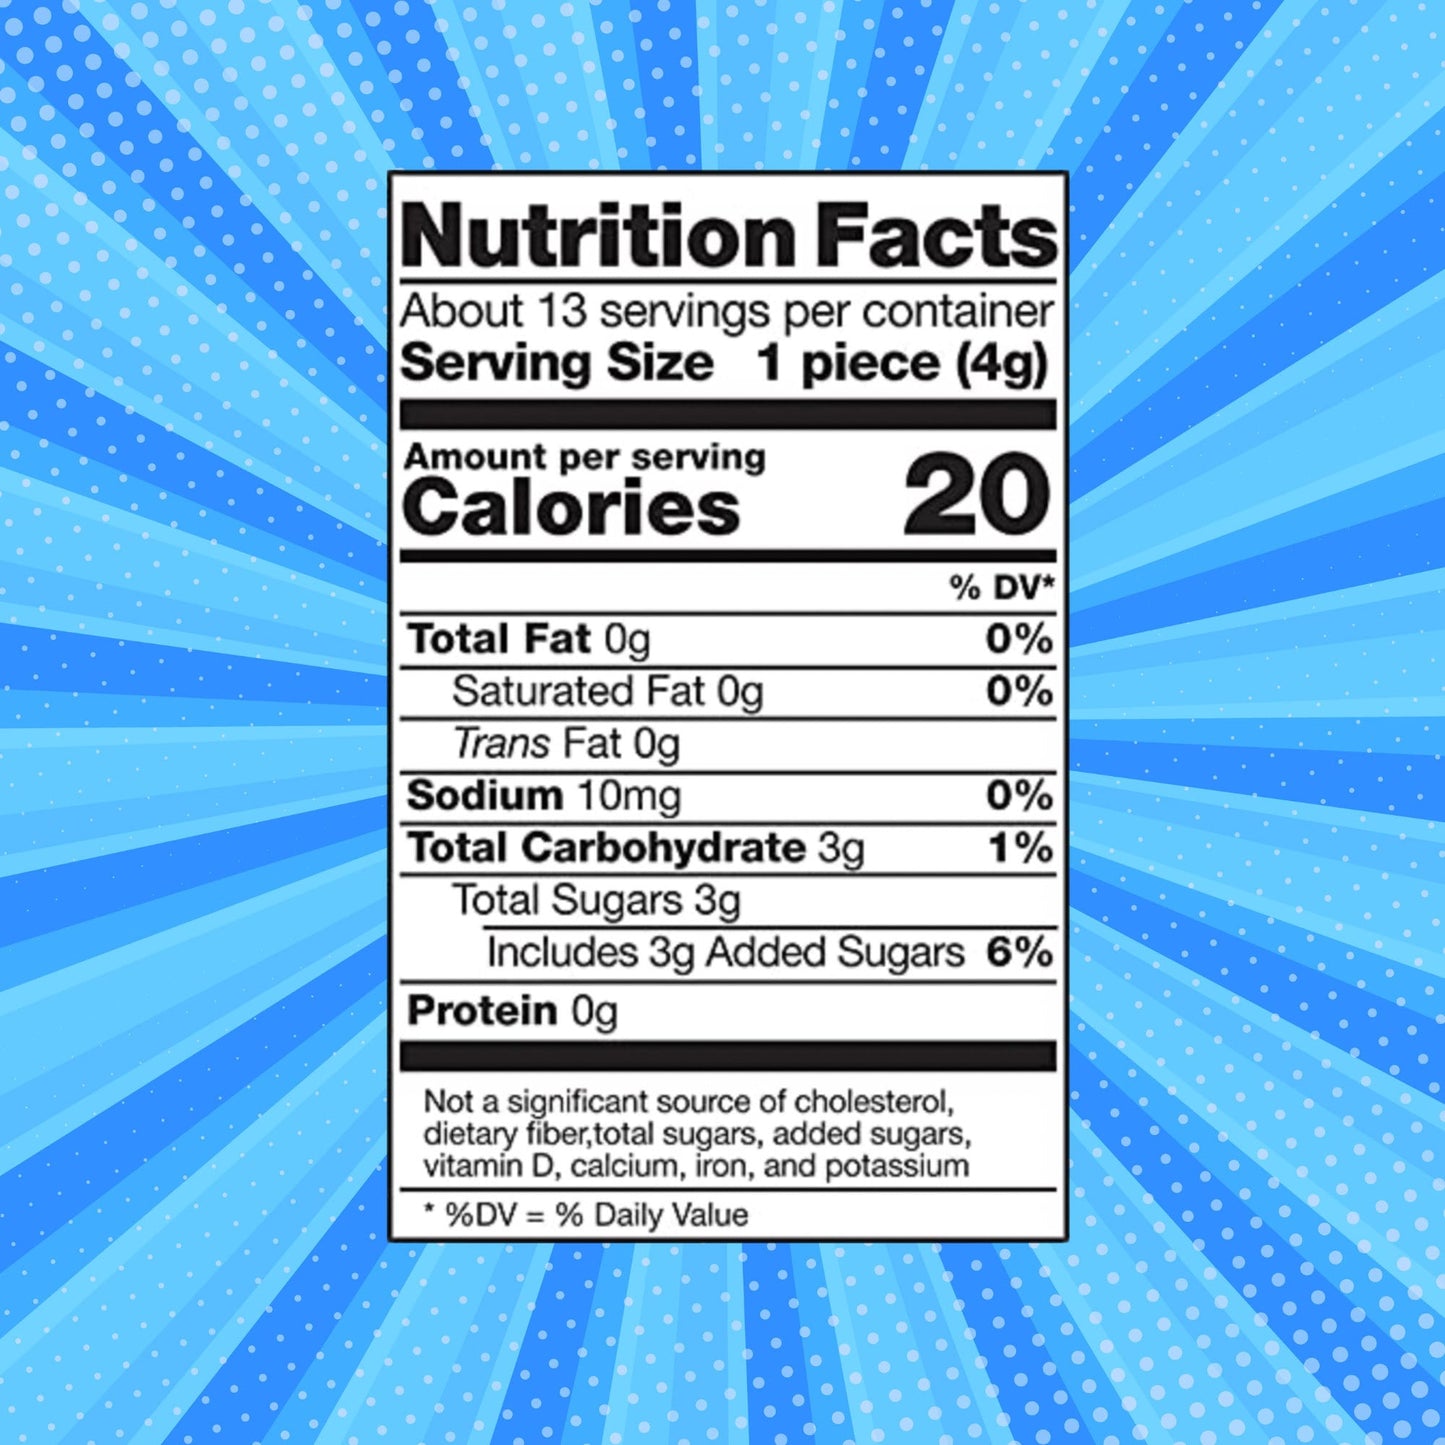 Creme Savers - Strawberries & Creme Flavor (Nutrition Facts)